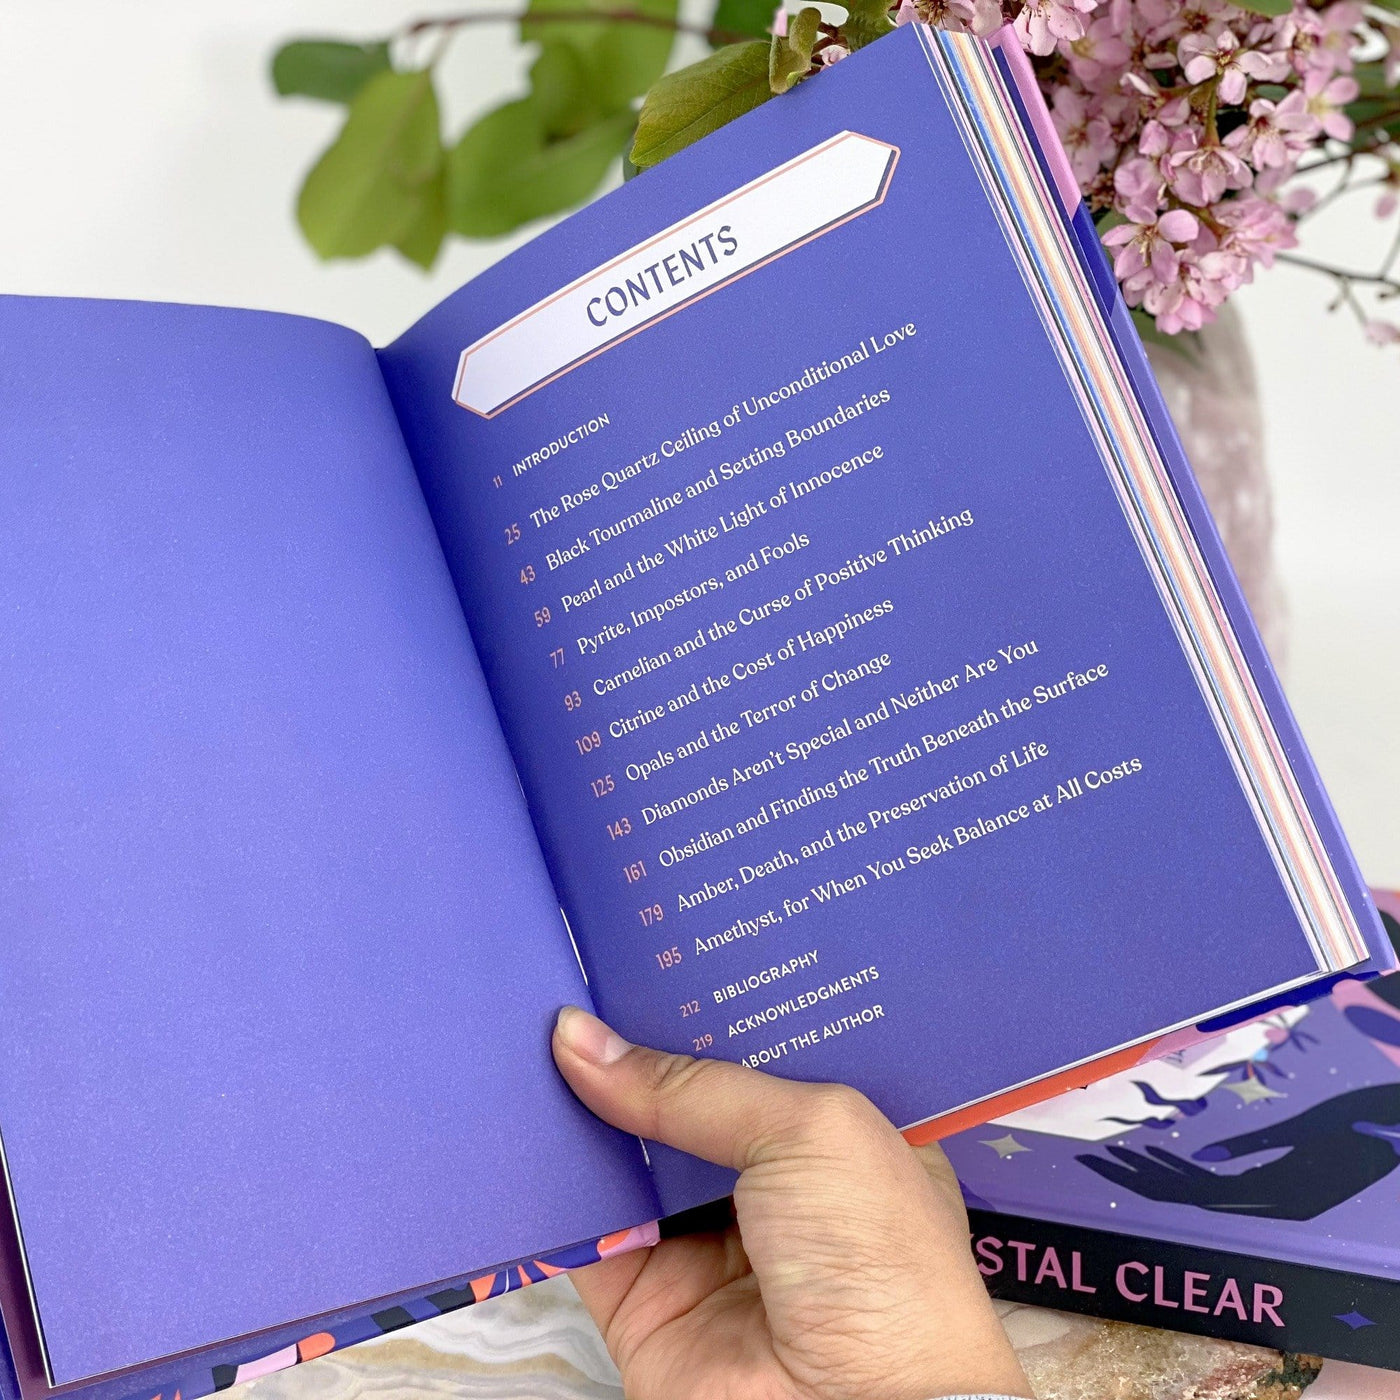 Crystal Clear Book opened up to table of contents